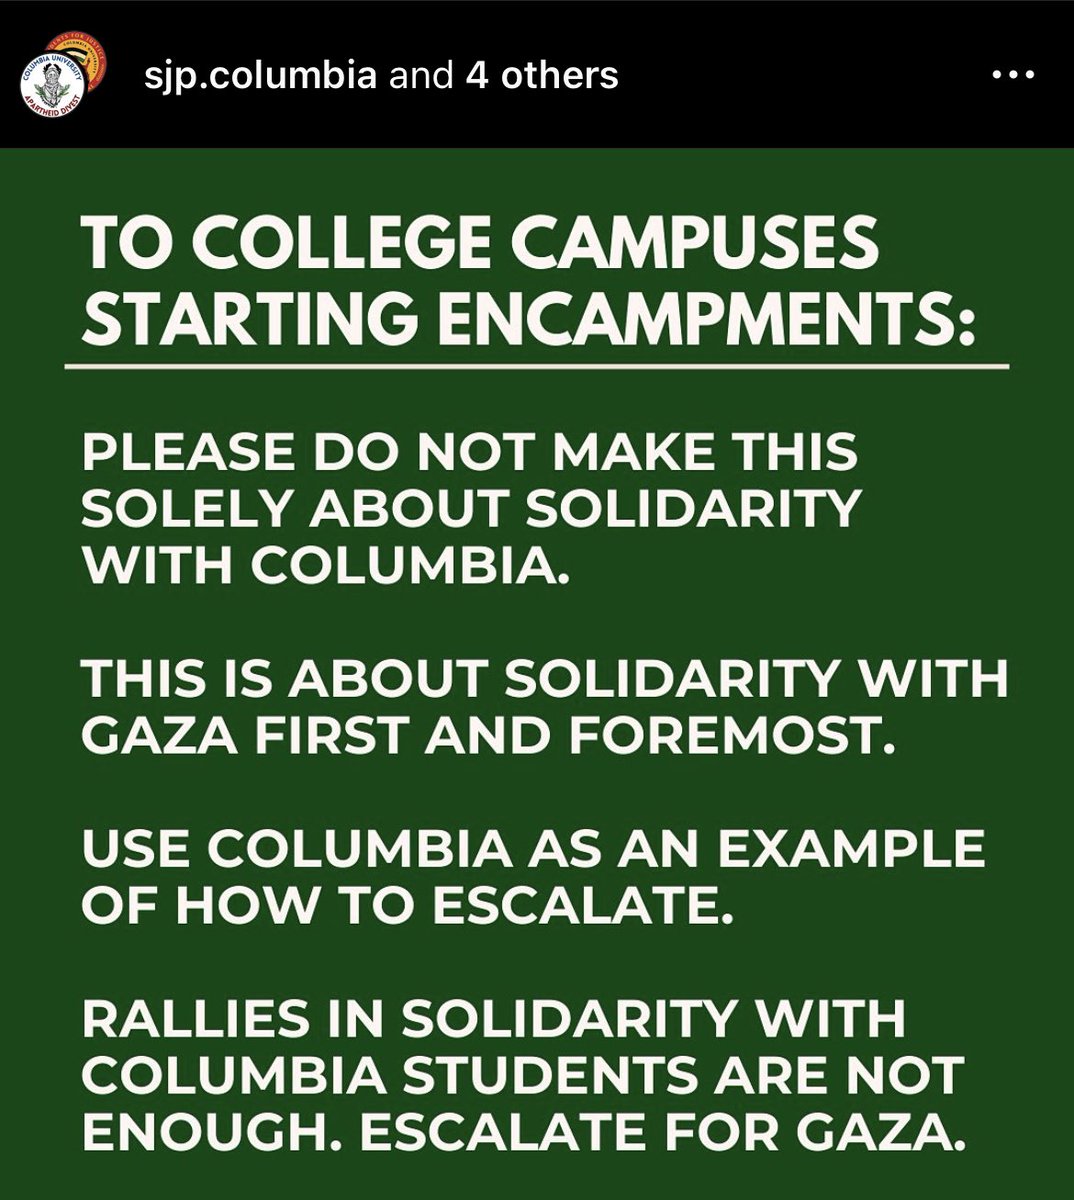 Please read this as many times as you need to. We don’t need rallies at other institutions saying “We stand with Columbia”. We need you to escalate for the sake of Gaza and take inspiration and tactics from Columbia as needed! Please focus on Gaza!!!